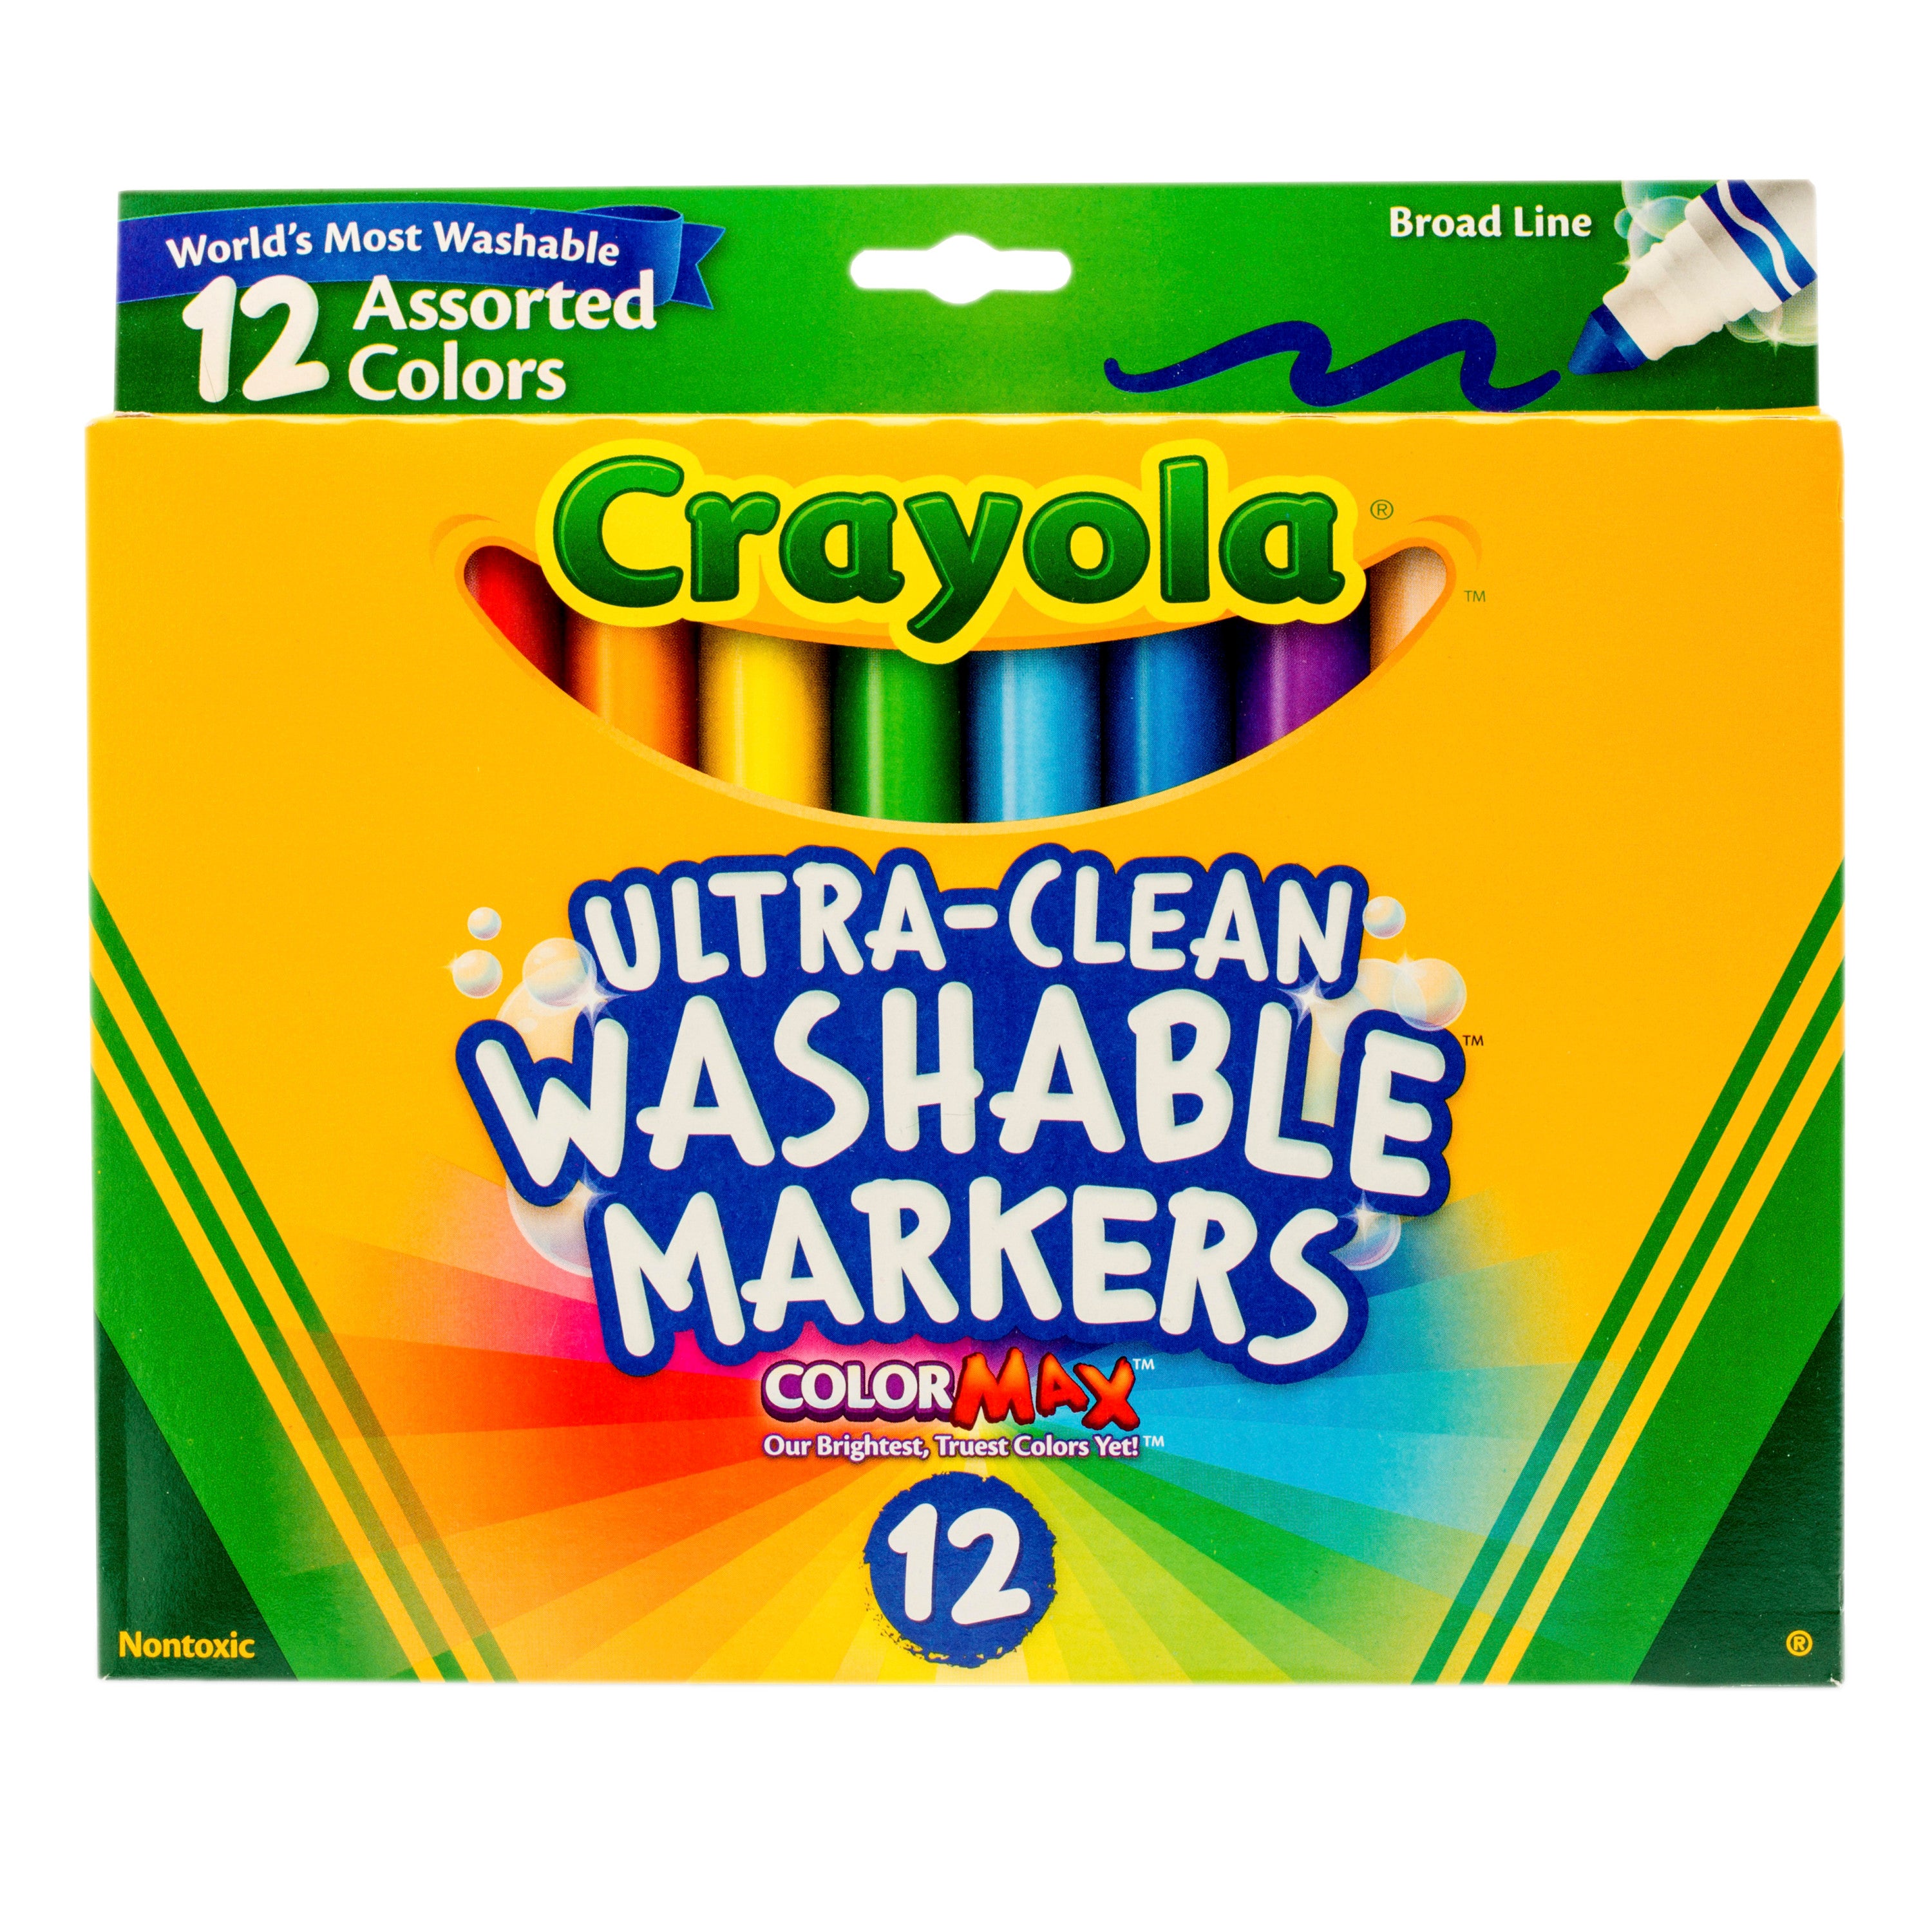 Crayola Washable Markers, Conical Tip, Nontoxic, Assorted, 12 /Set